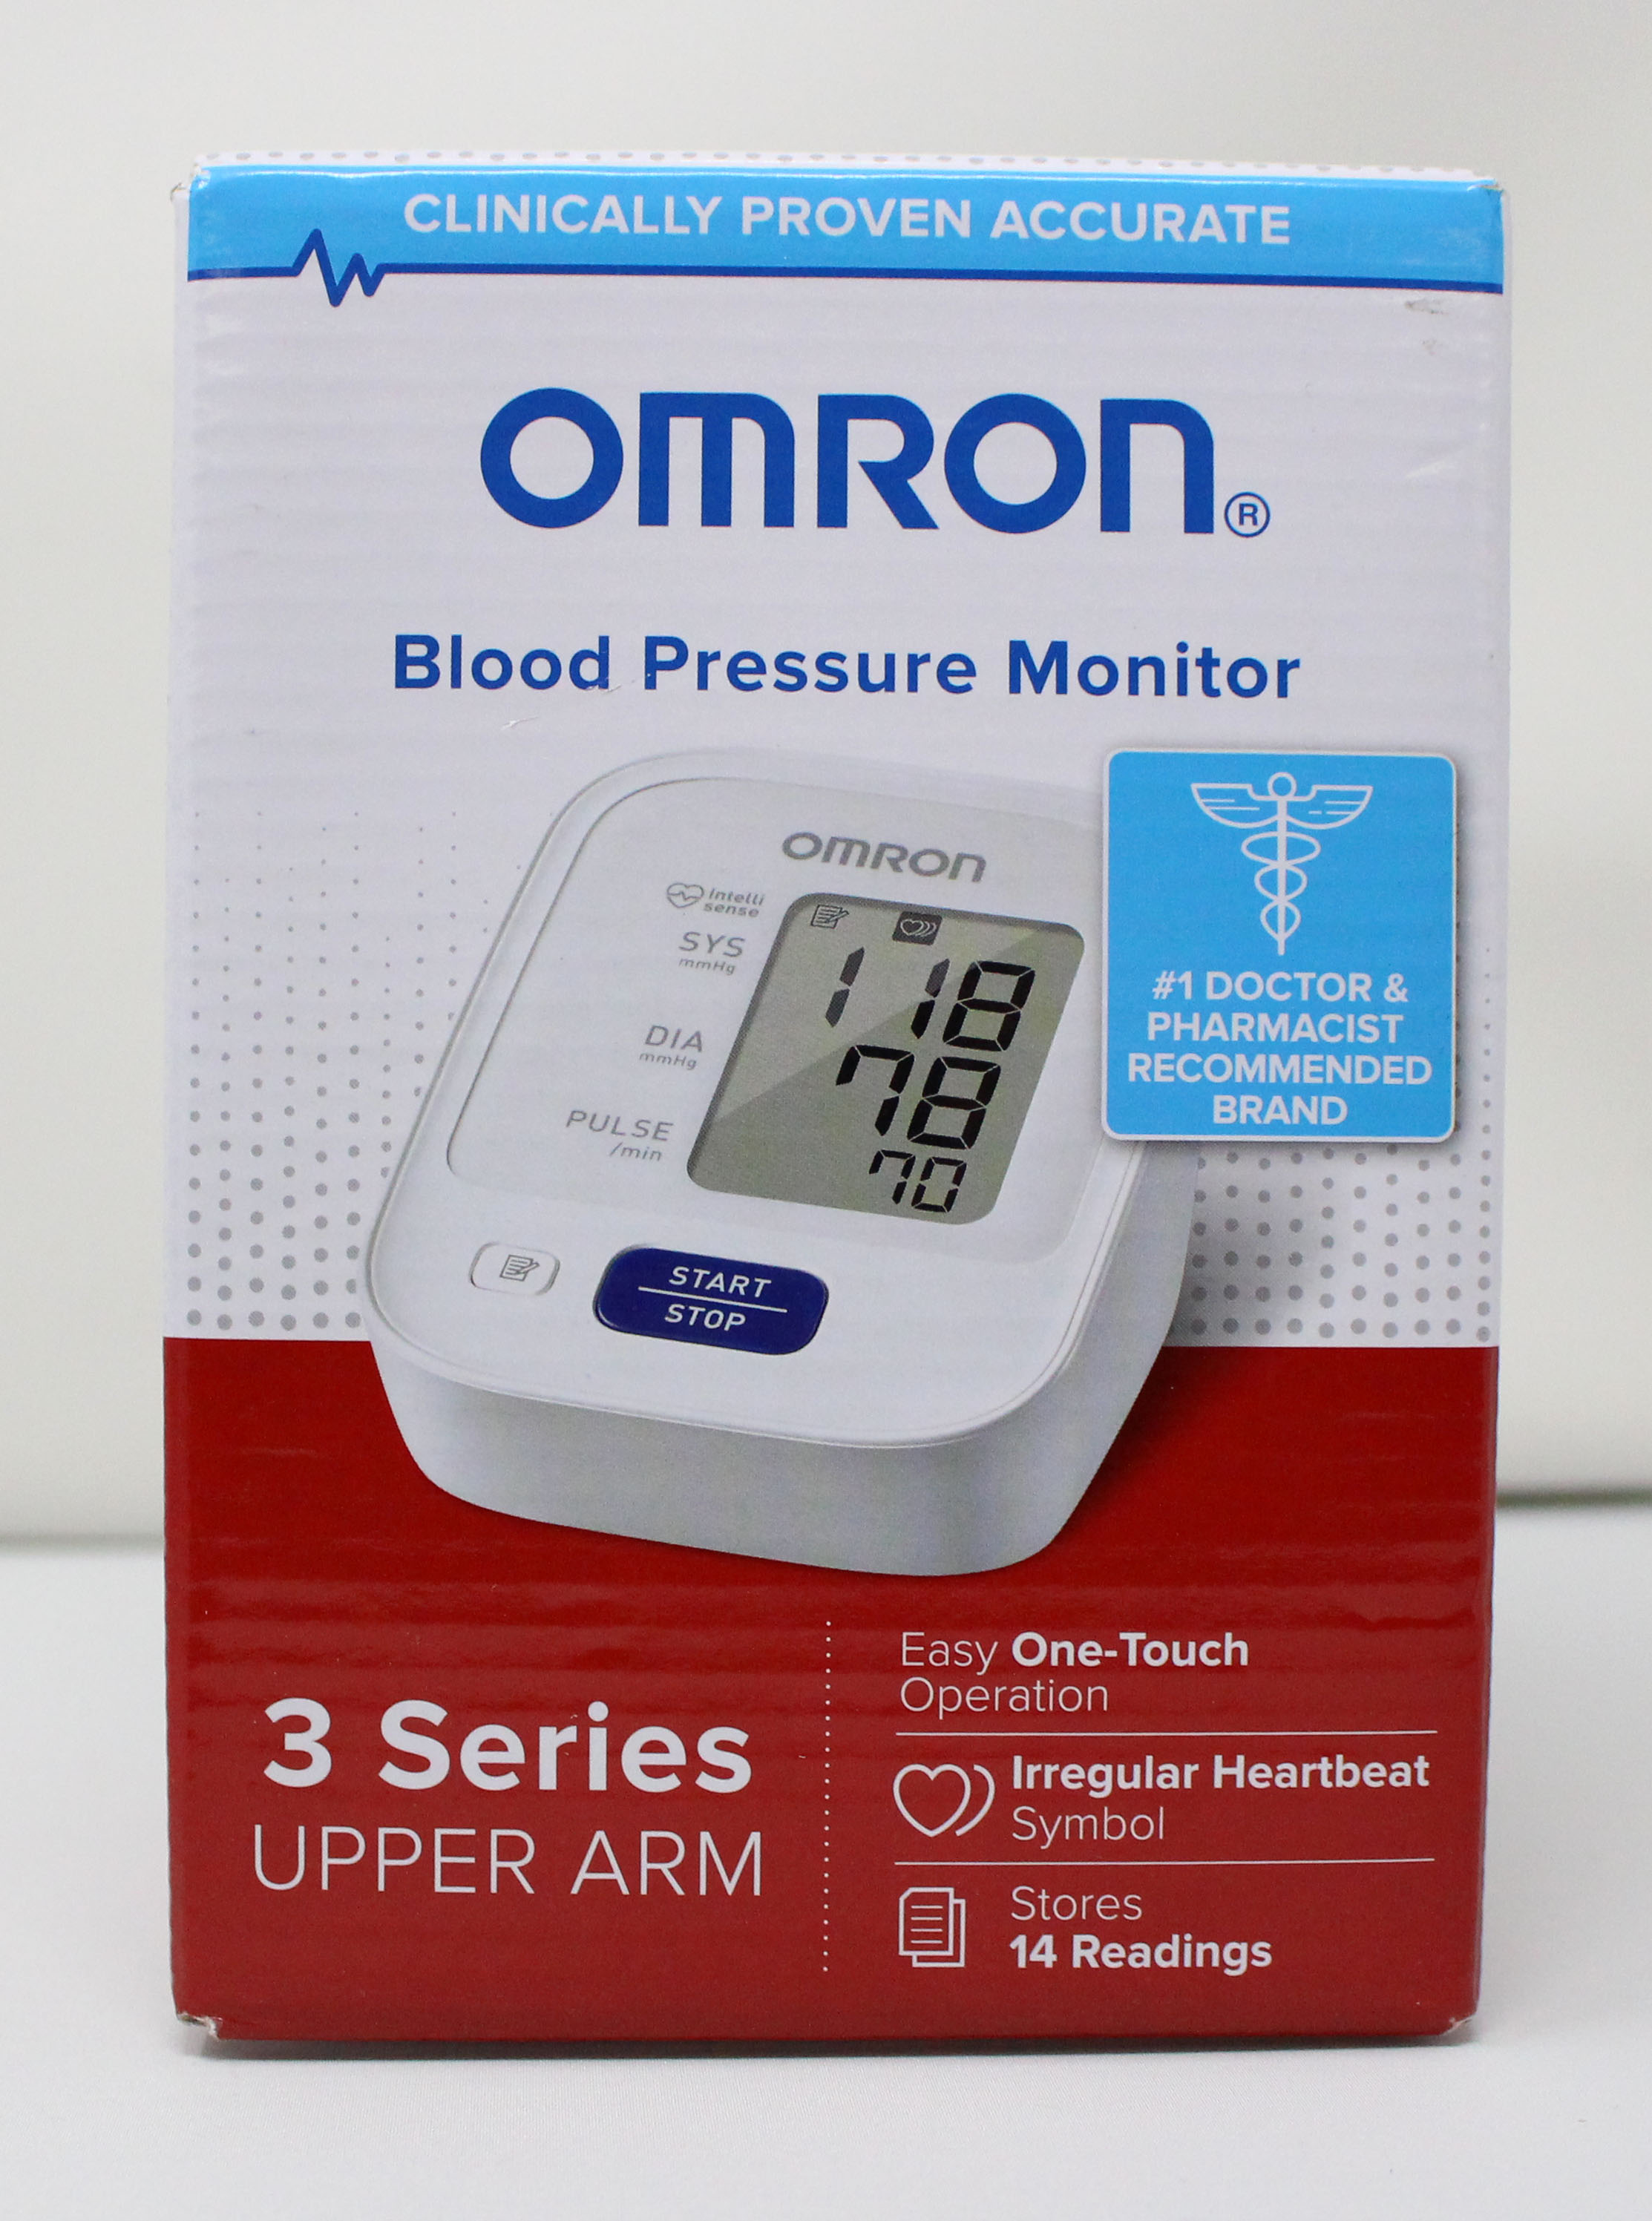 Omron 3 Series Upper Arm Blood Pressure Monitor - image 1 of 2